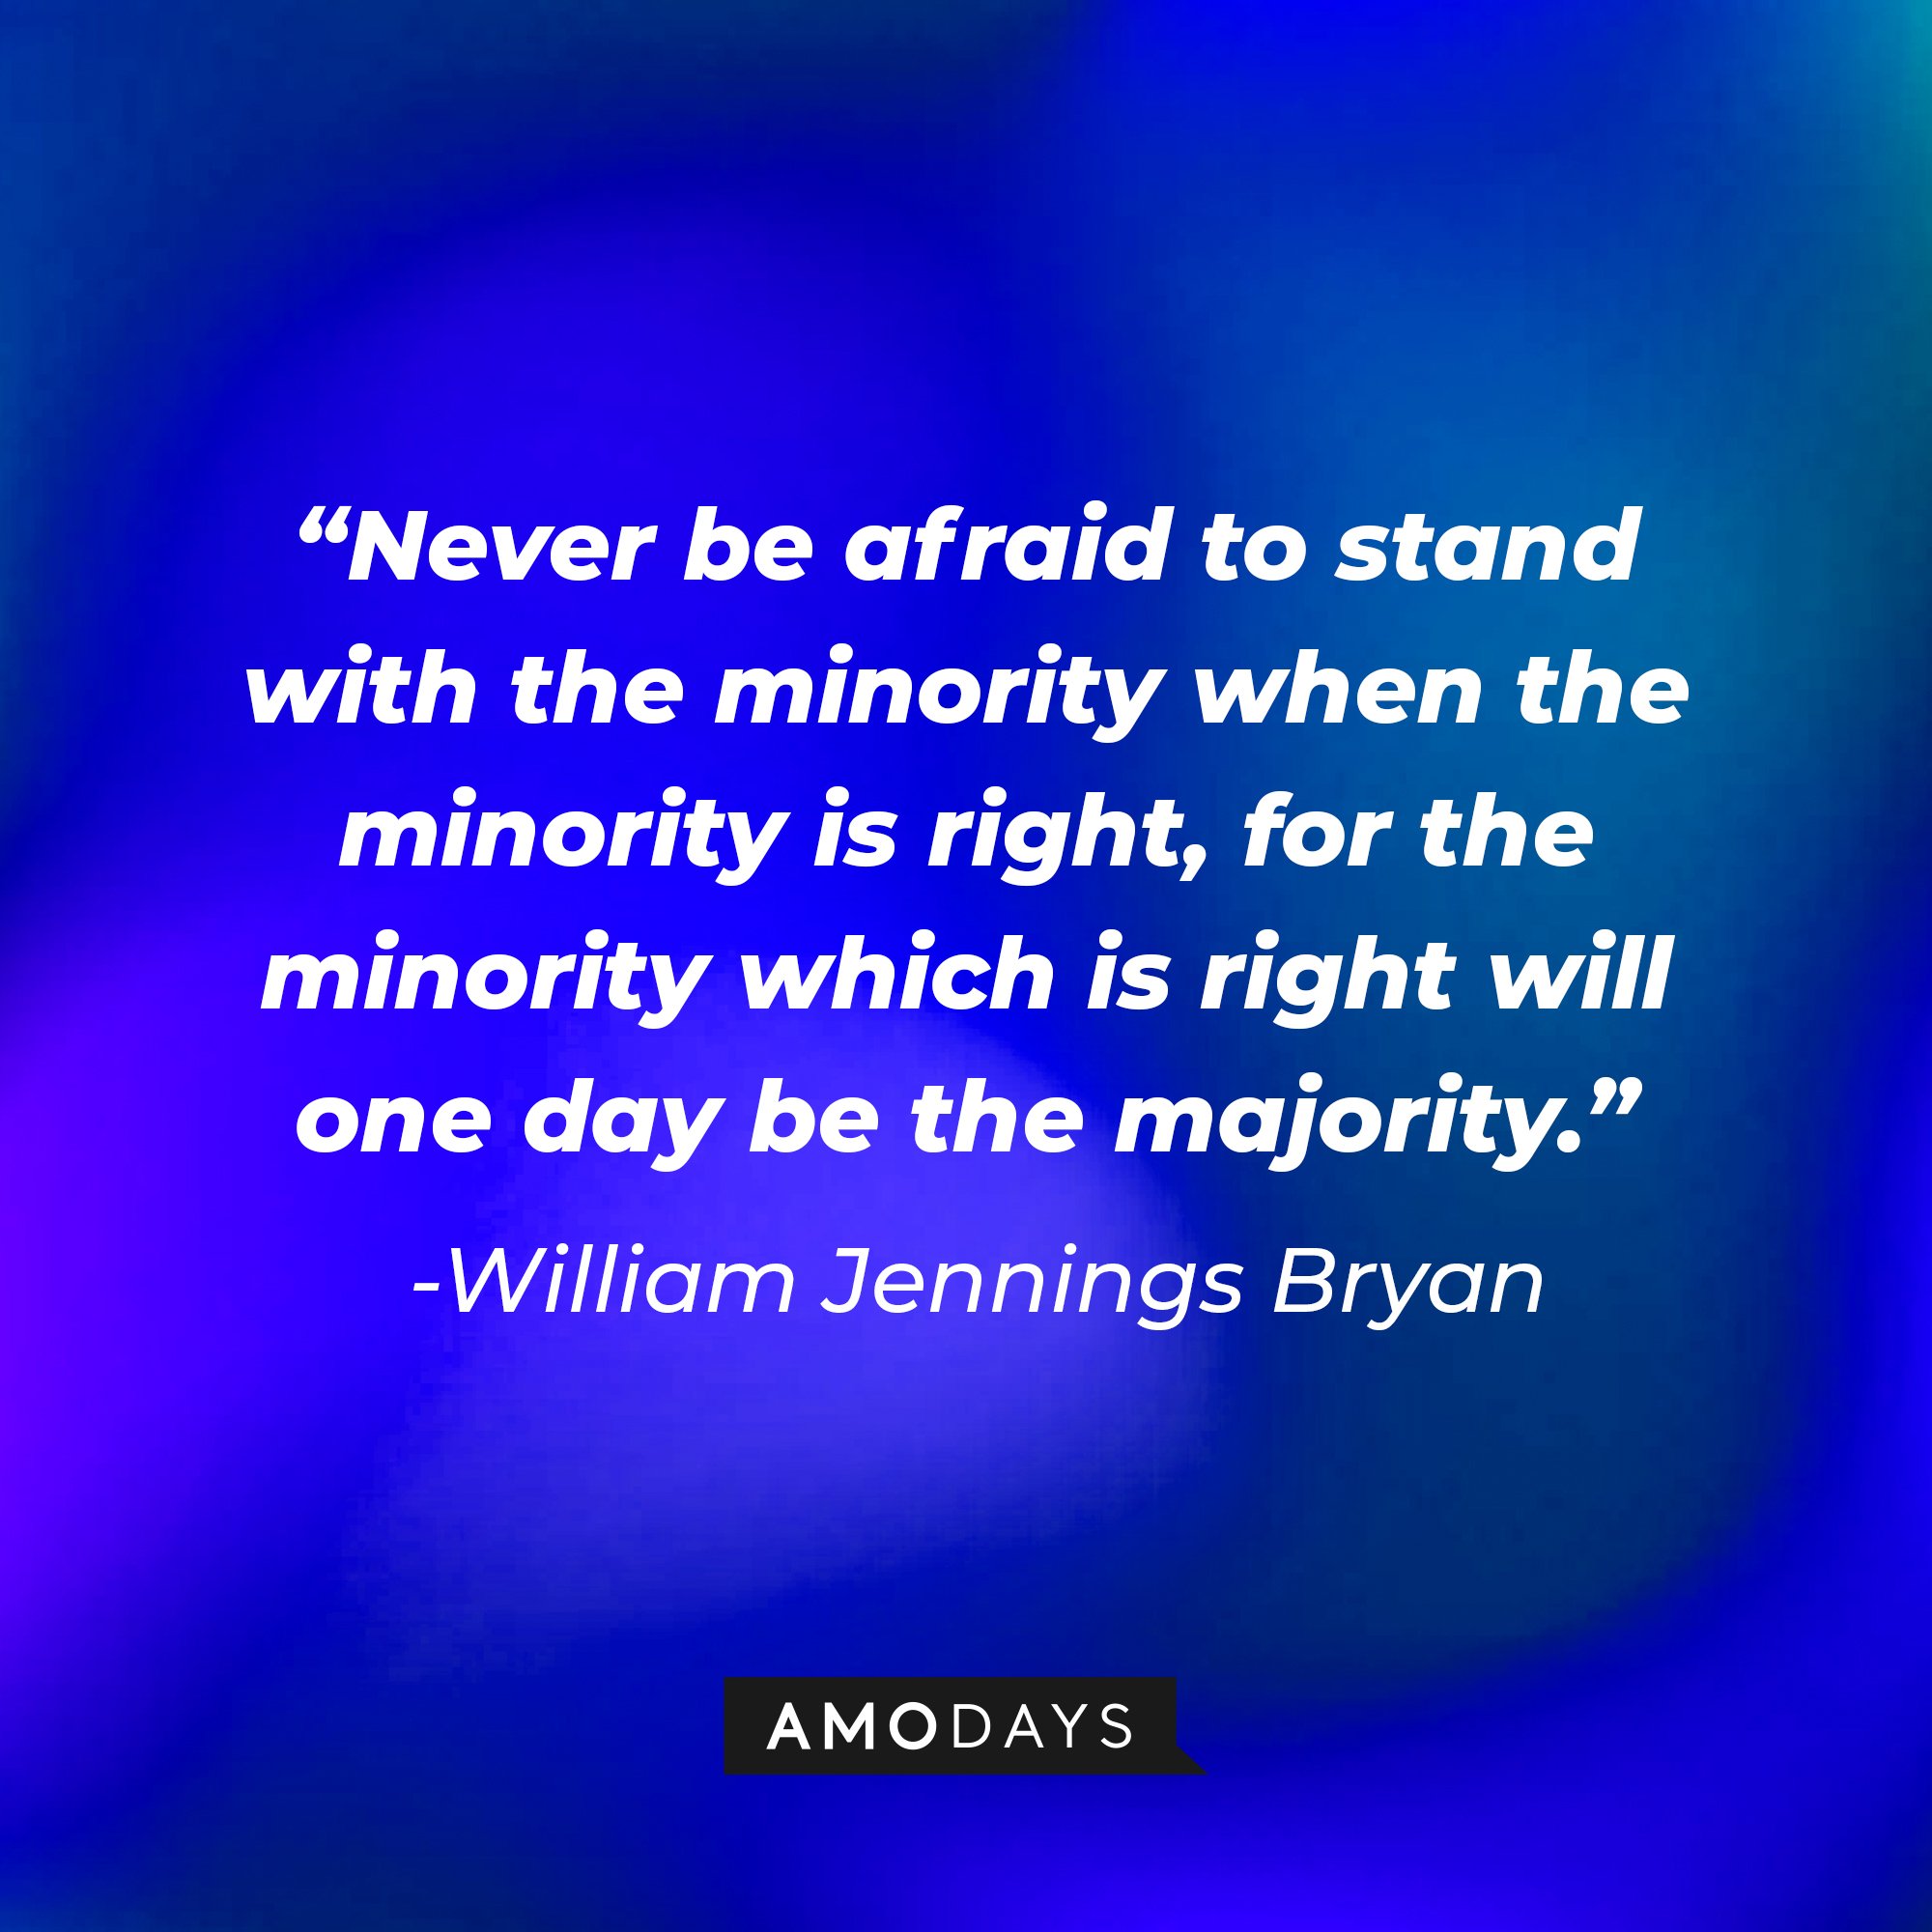 William Jennings Bryan's quote: "Never be afraid to stand with the minority when the minority is right, for the minority which is right will one day be the majority."  | Image: AmoDays